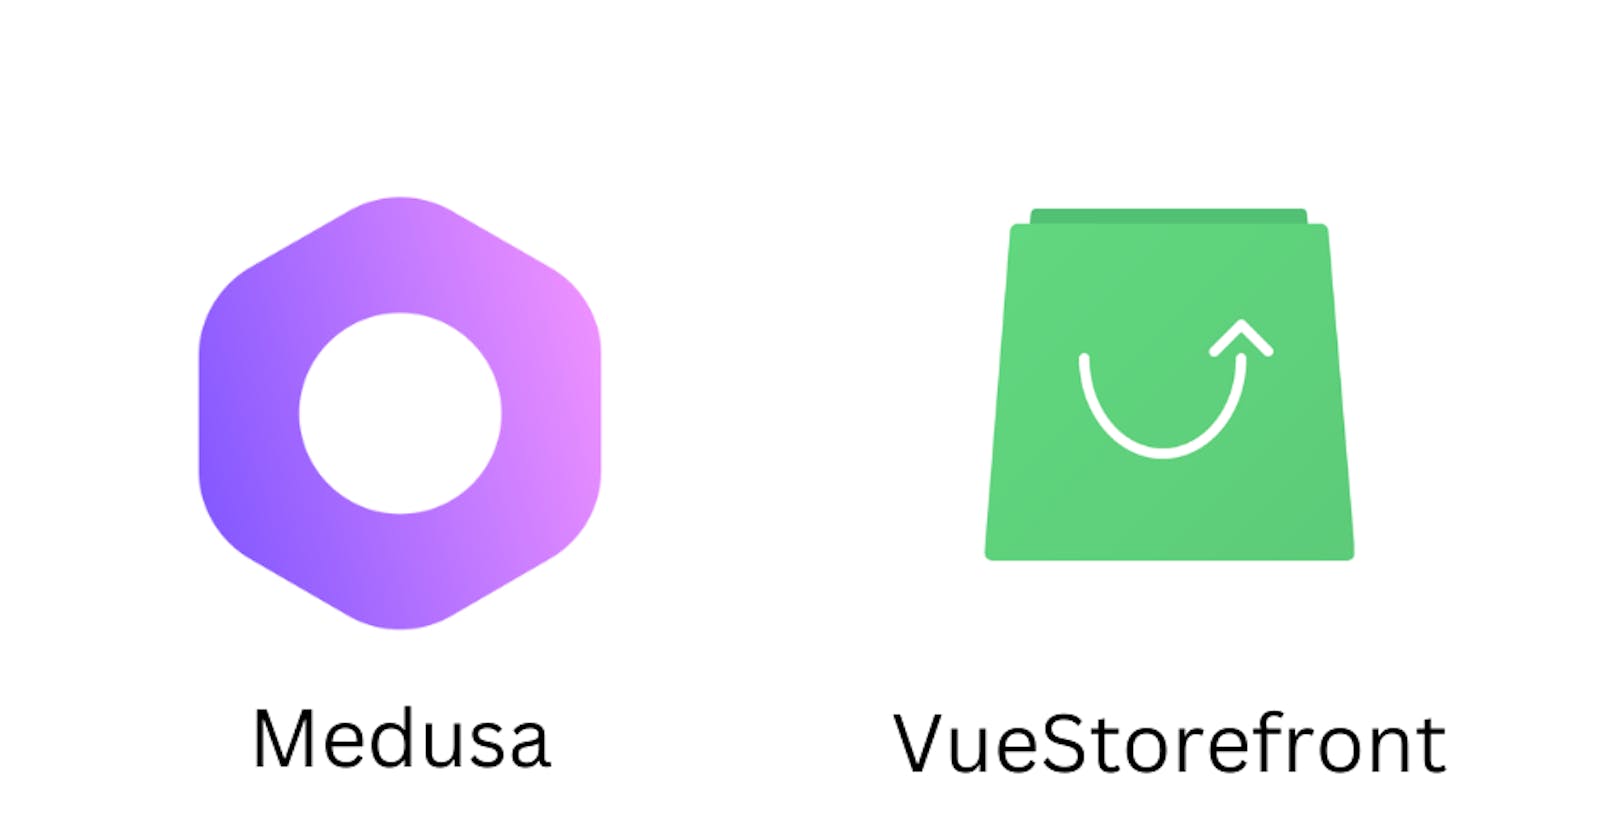 How to setup free E-commerce Store in 3 steps with medusa(React) and vuestorefront(Vue)